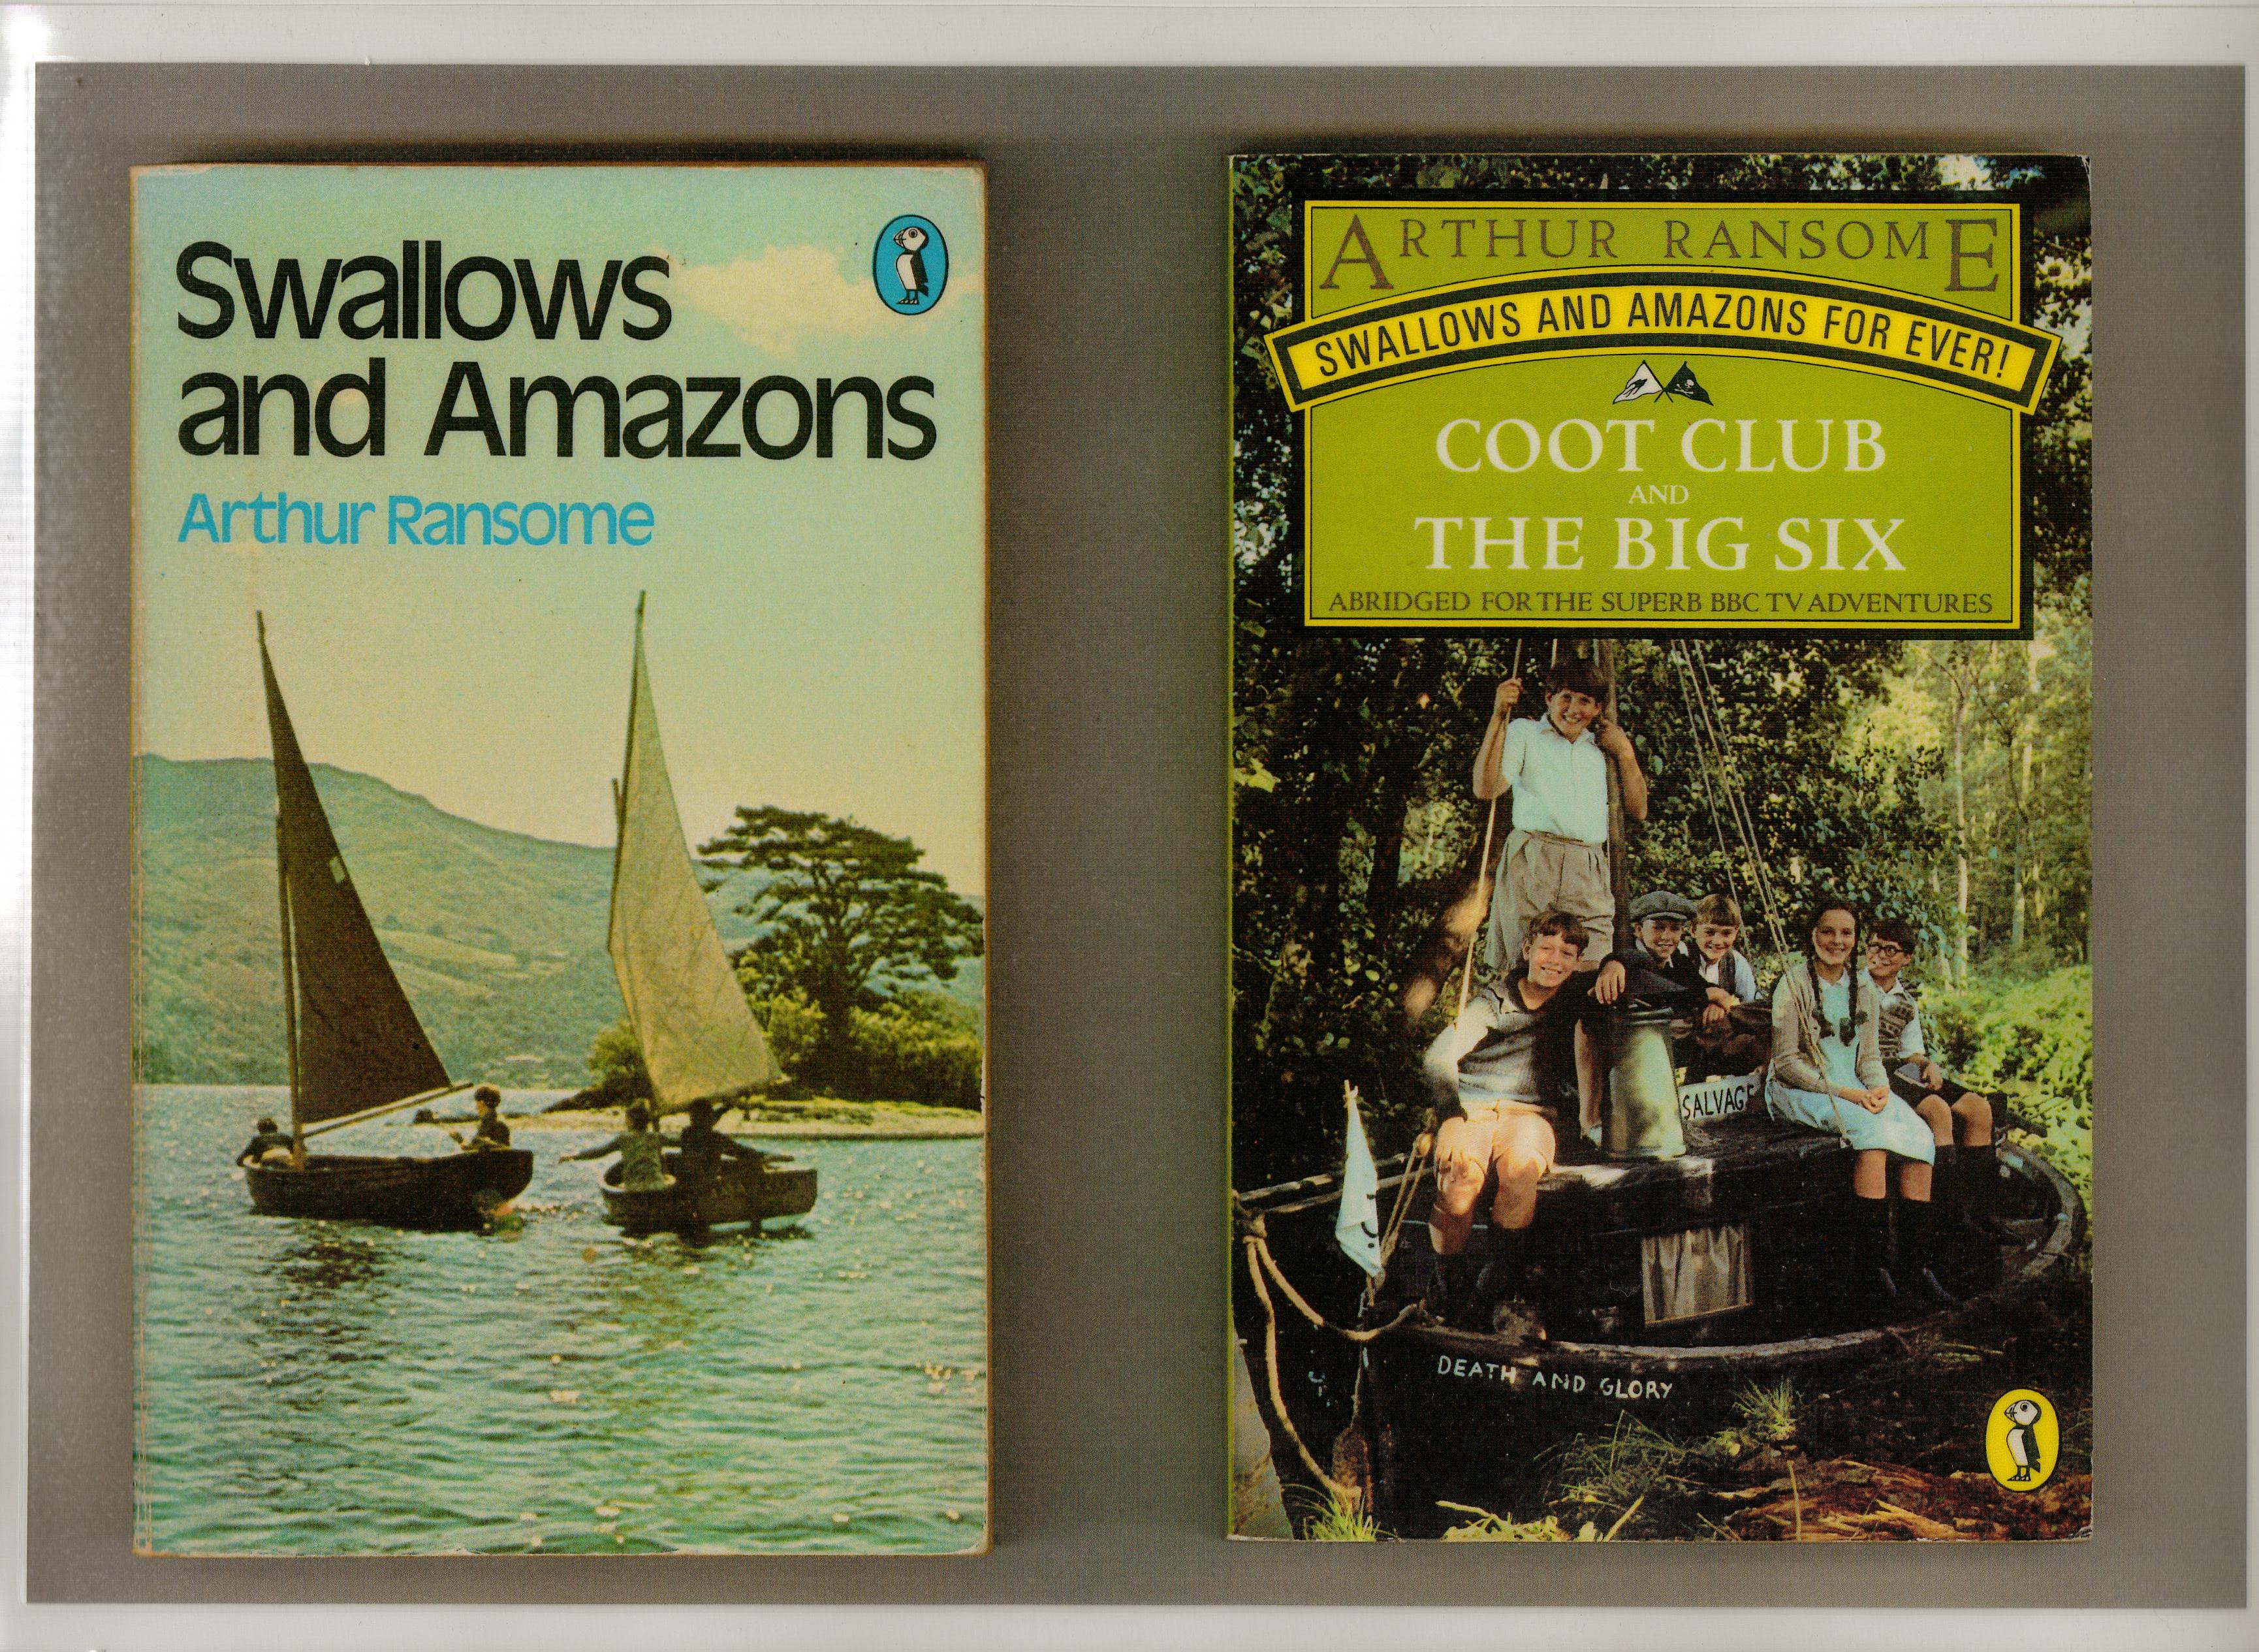 Swallows and Amazons book cover Coot Club and The Big Six book cover